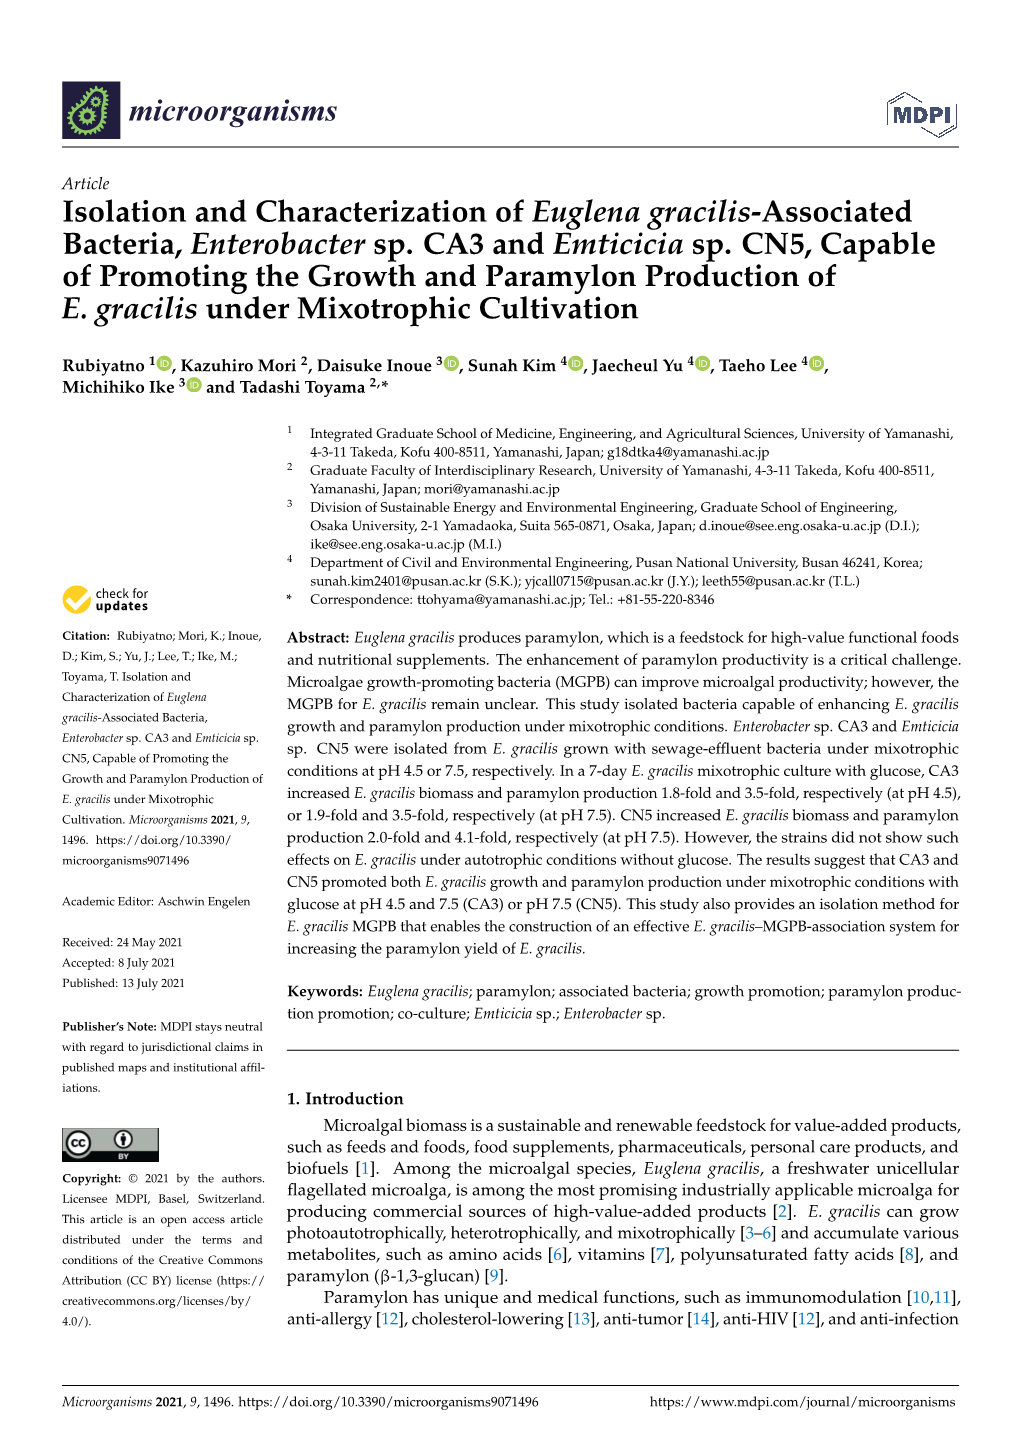 Isolation and Characterization of Euglena Gracilis-Associated Bacteria, Enterobacter Sp. CA3 and Emticicia Sp. CN5, Capable of P